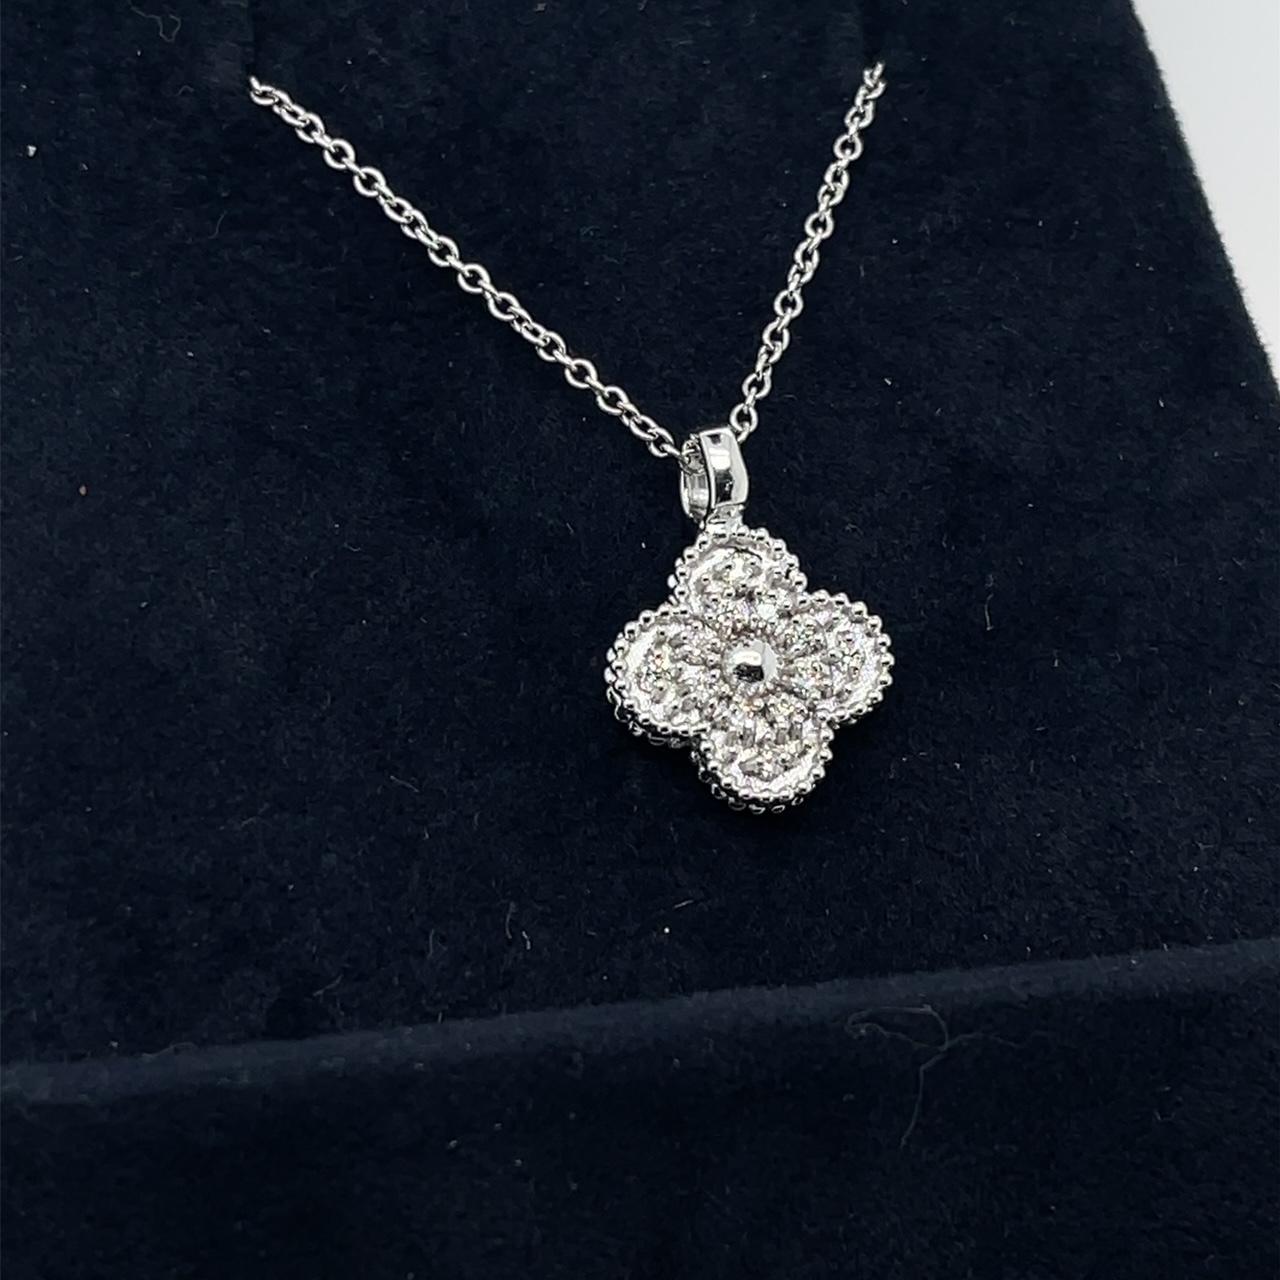 DIAMOND CLOVER NECKLACE 18K WHITE GOLD

Total Carat Weight 0.20 carat 

DE Color VVS/VS Clarity

Set in 18K White Gold

With 16.0 